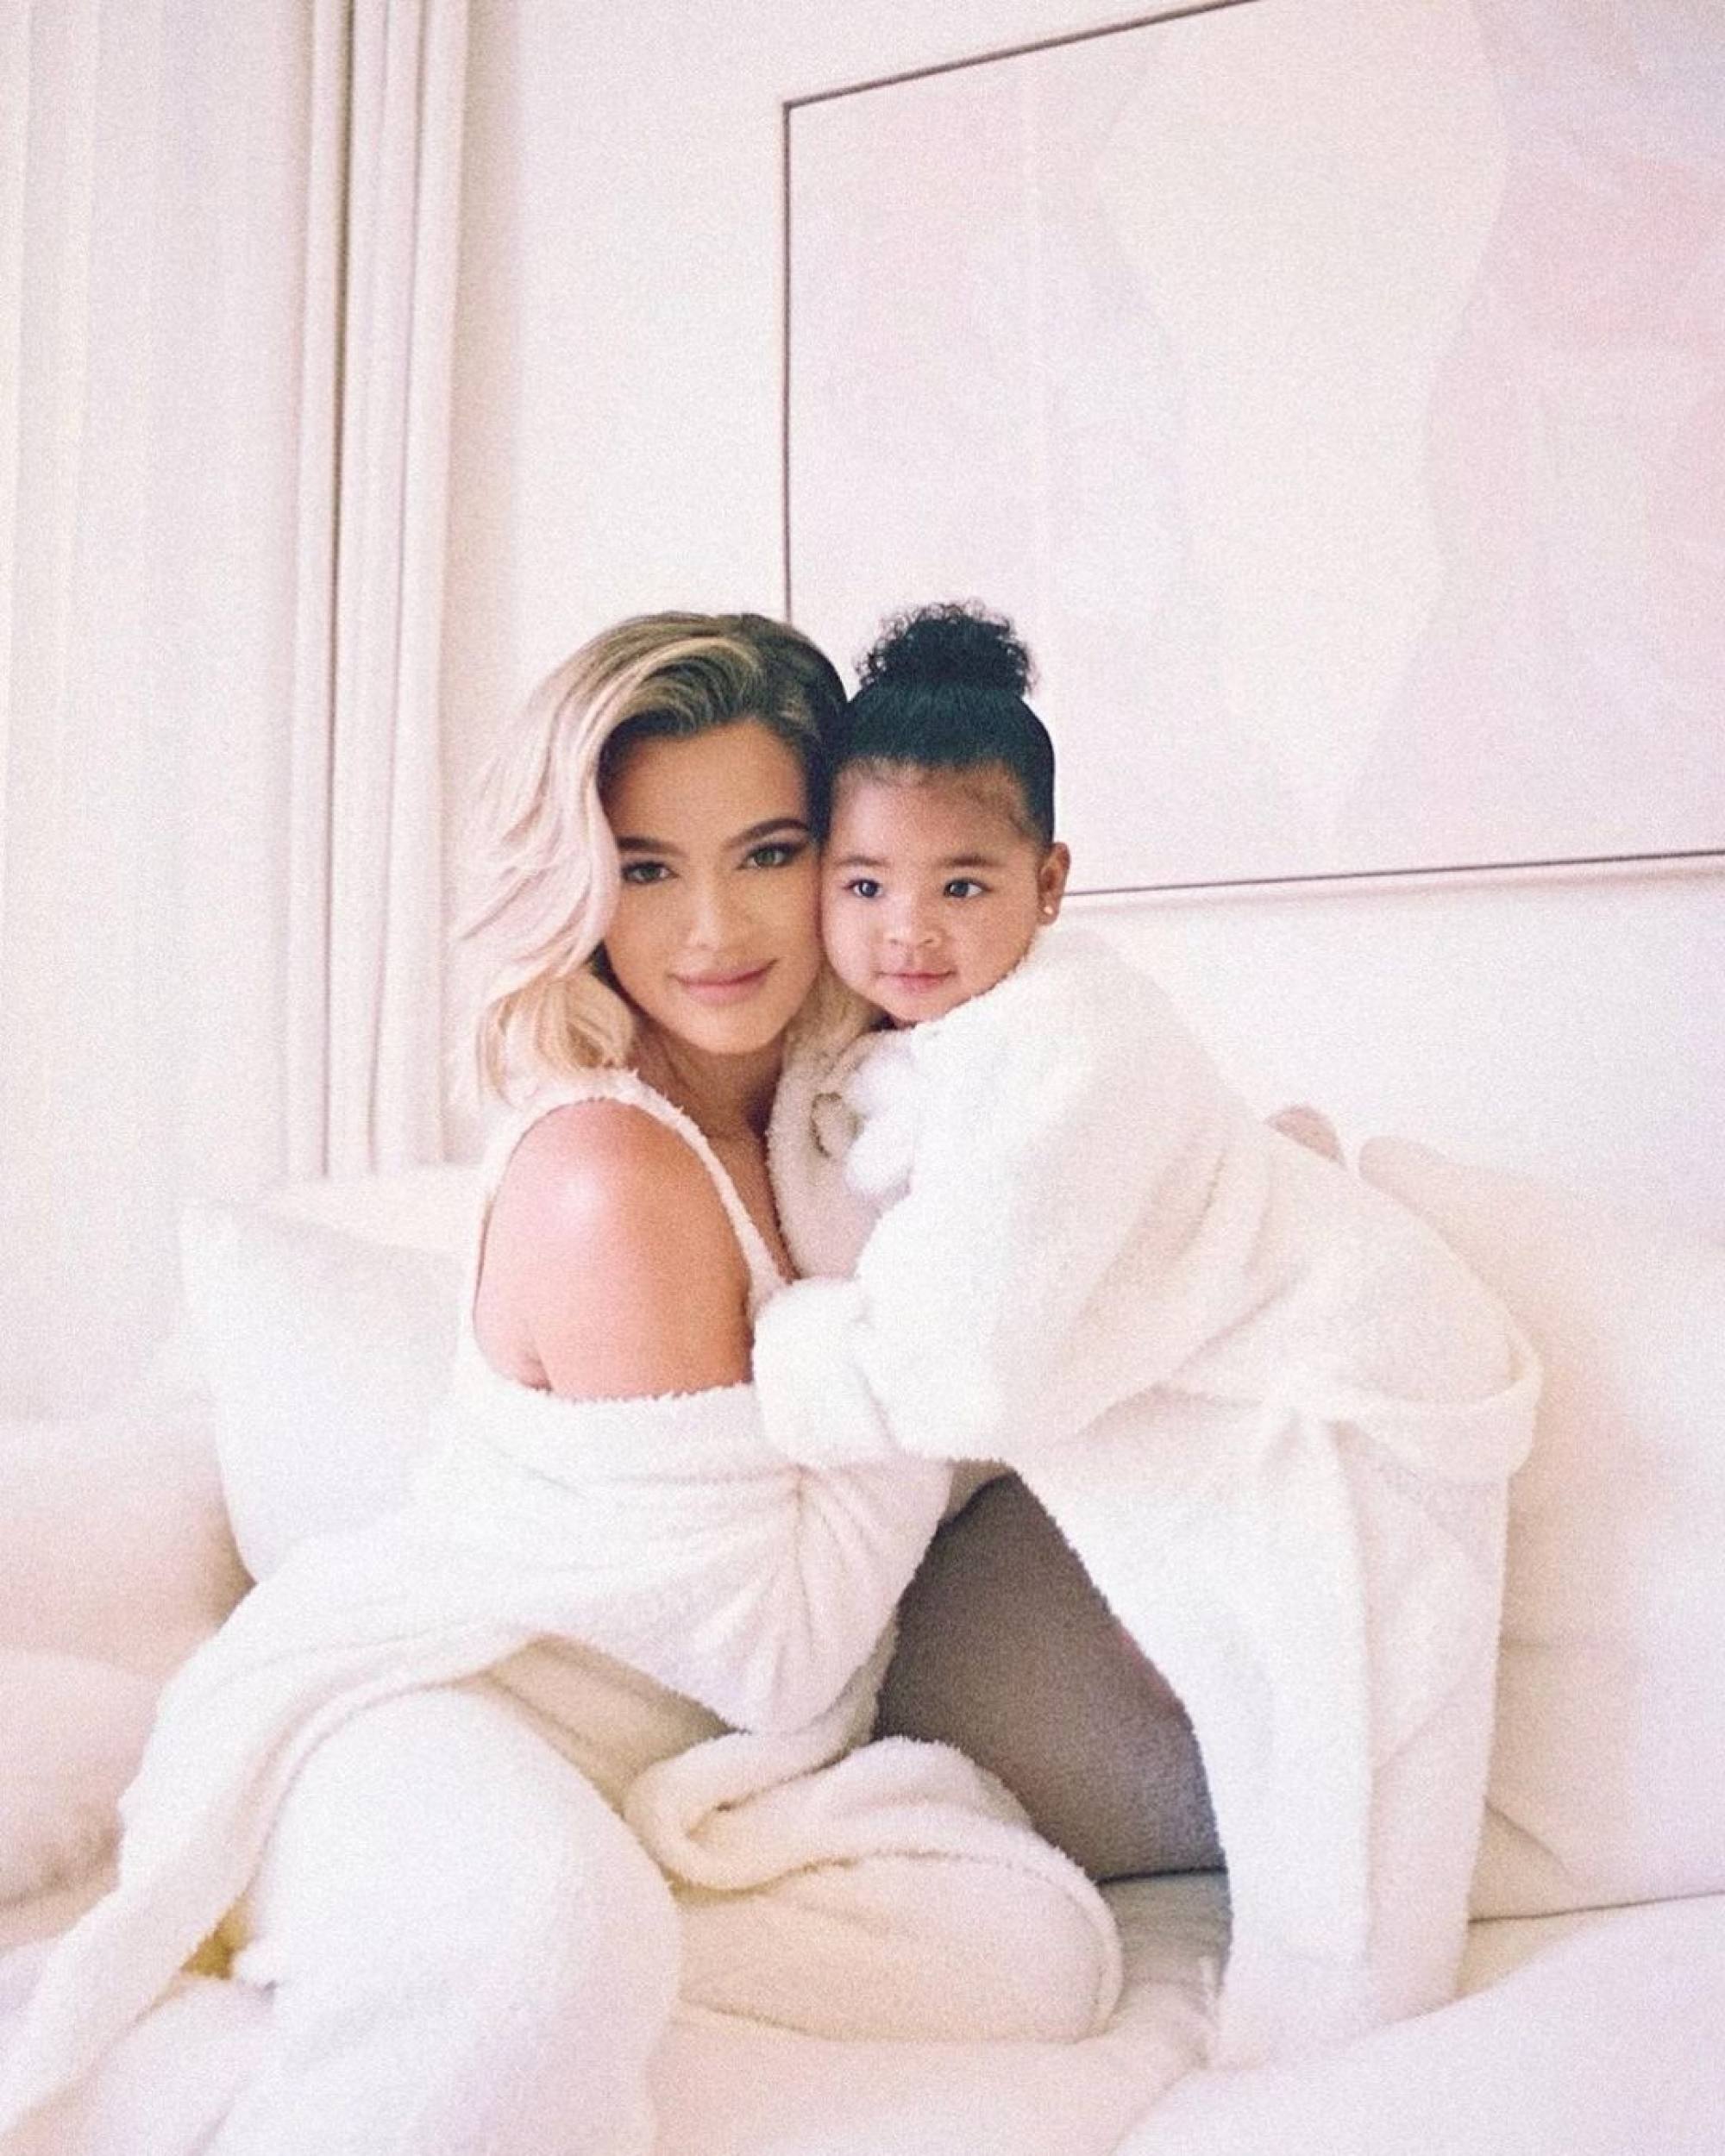 8 of Khloé Kardashian and True Thompson's best twinning looks: the adorable  mother-daughter duo matched in Dior, Dolce & Gabbana, Burberry, Kim  Kardashian's Skims and even Disney Halloween costumes